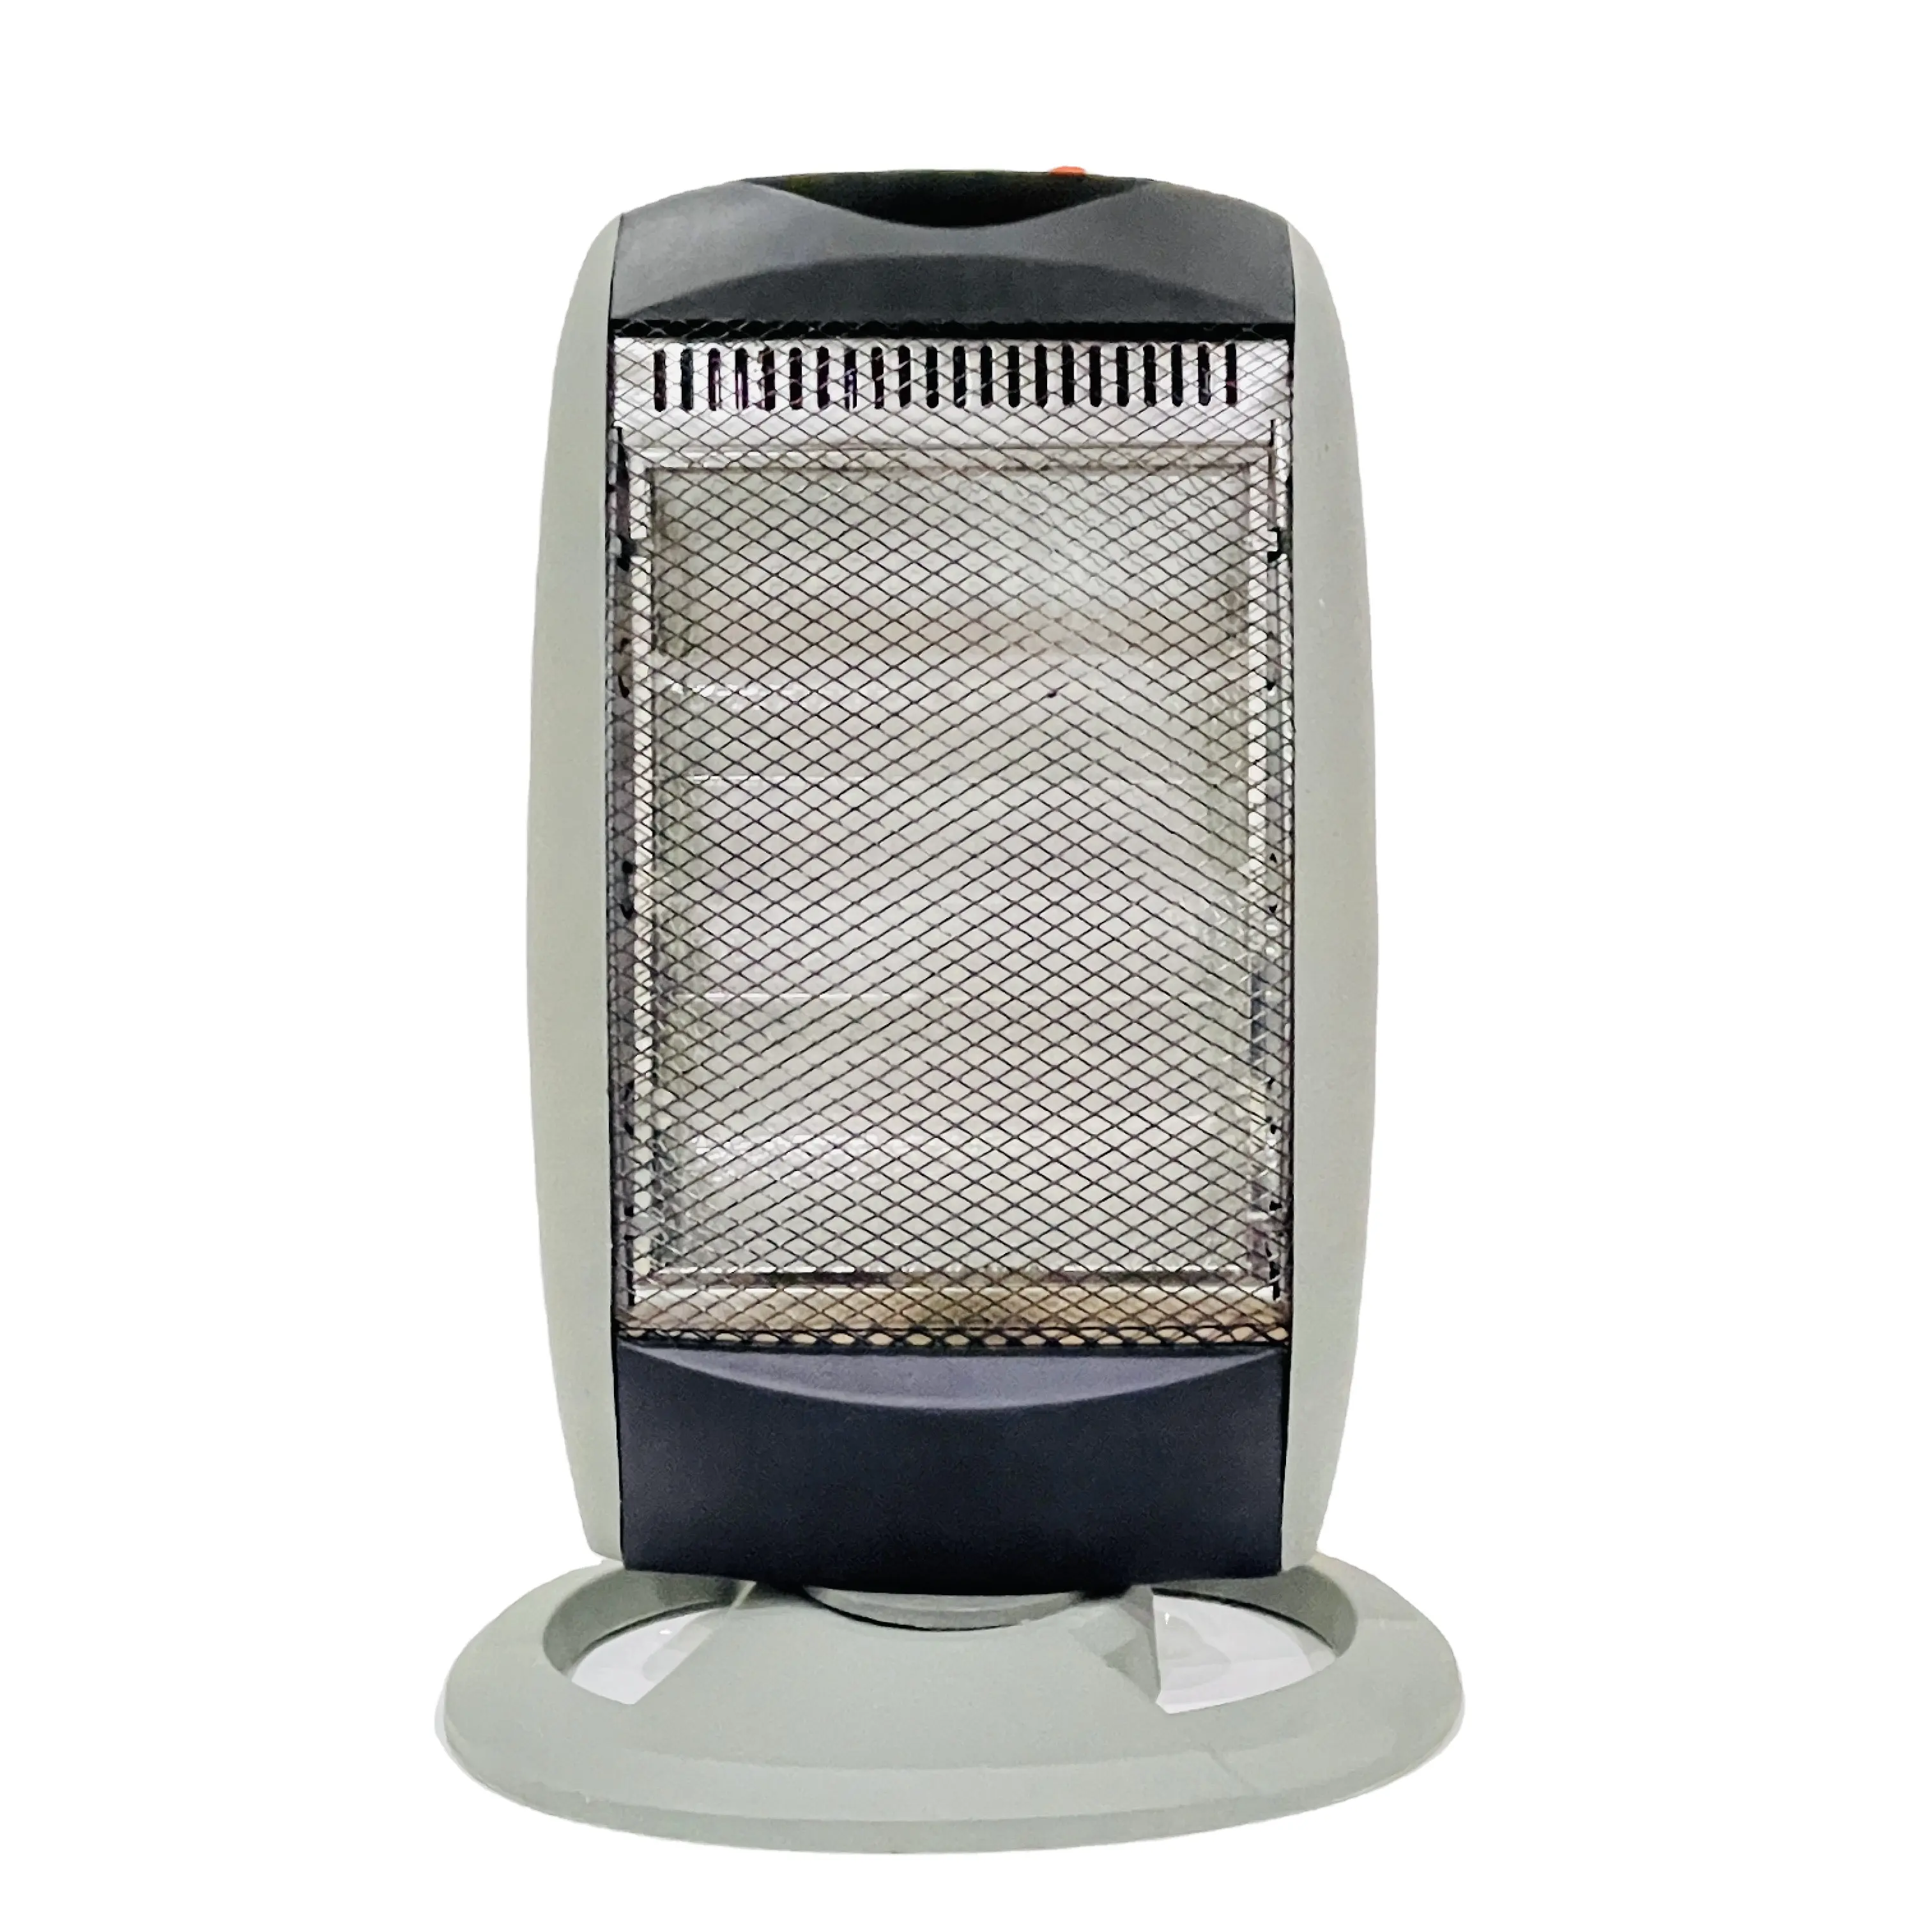 New Halogen Heater400W/800W/1200W High Quality Rotatable Handle Mini Electric Room Heater With 3 Heating